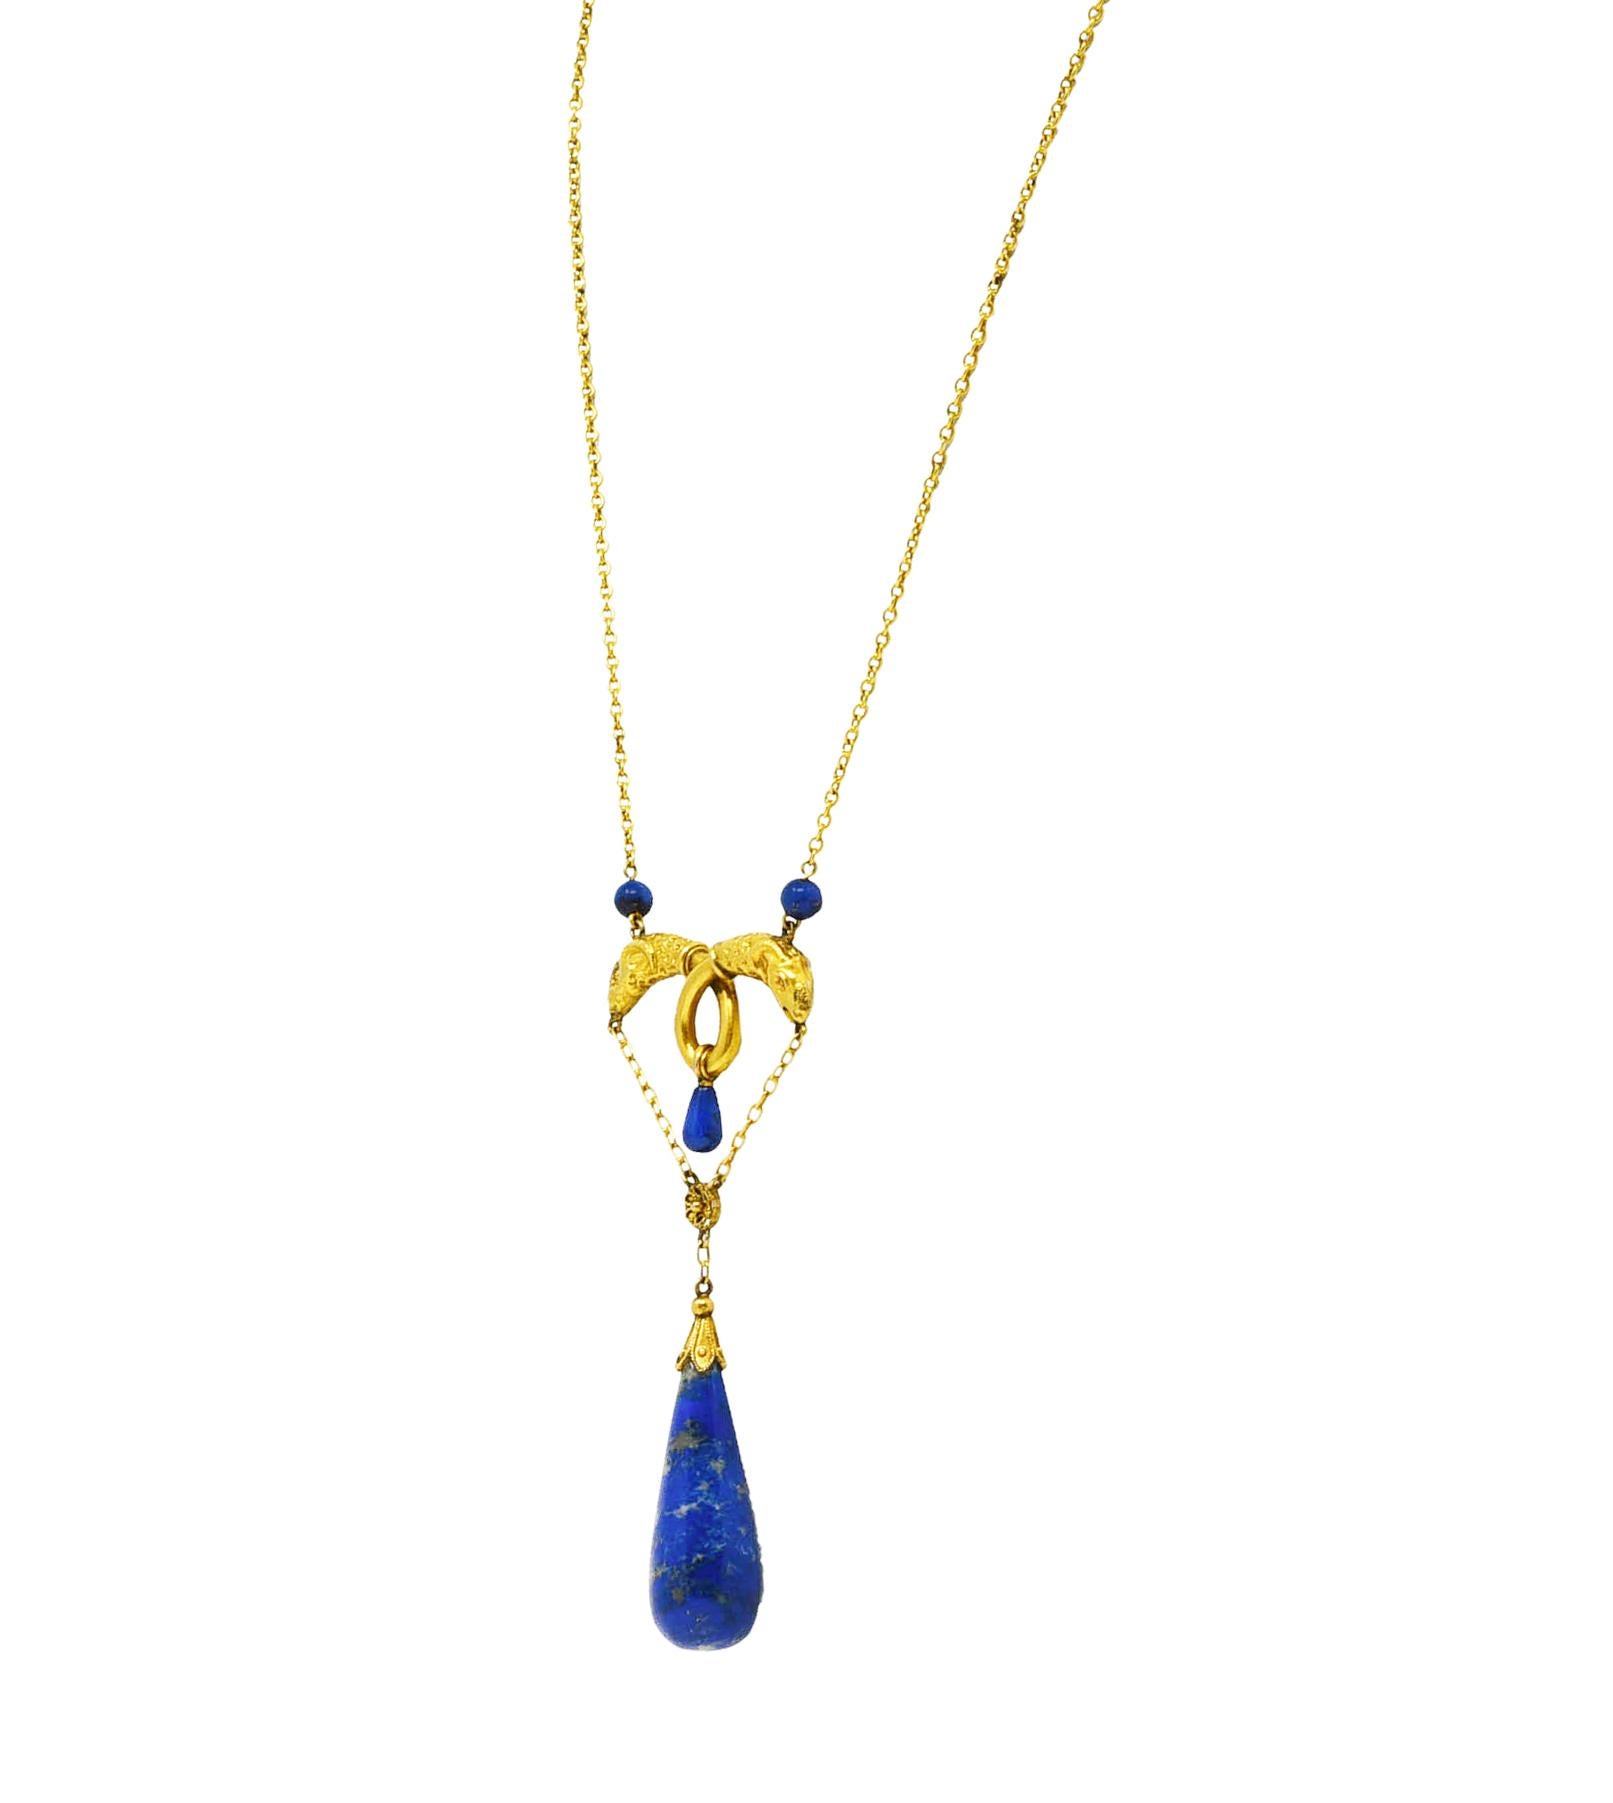 Women's or Men's Victorian Etruscan Revival Lapis Lazuli 14 Karat Yellow Gold Swagged Necklace For Sale